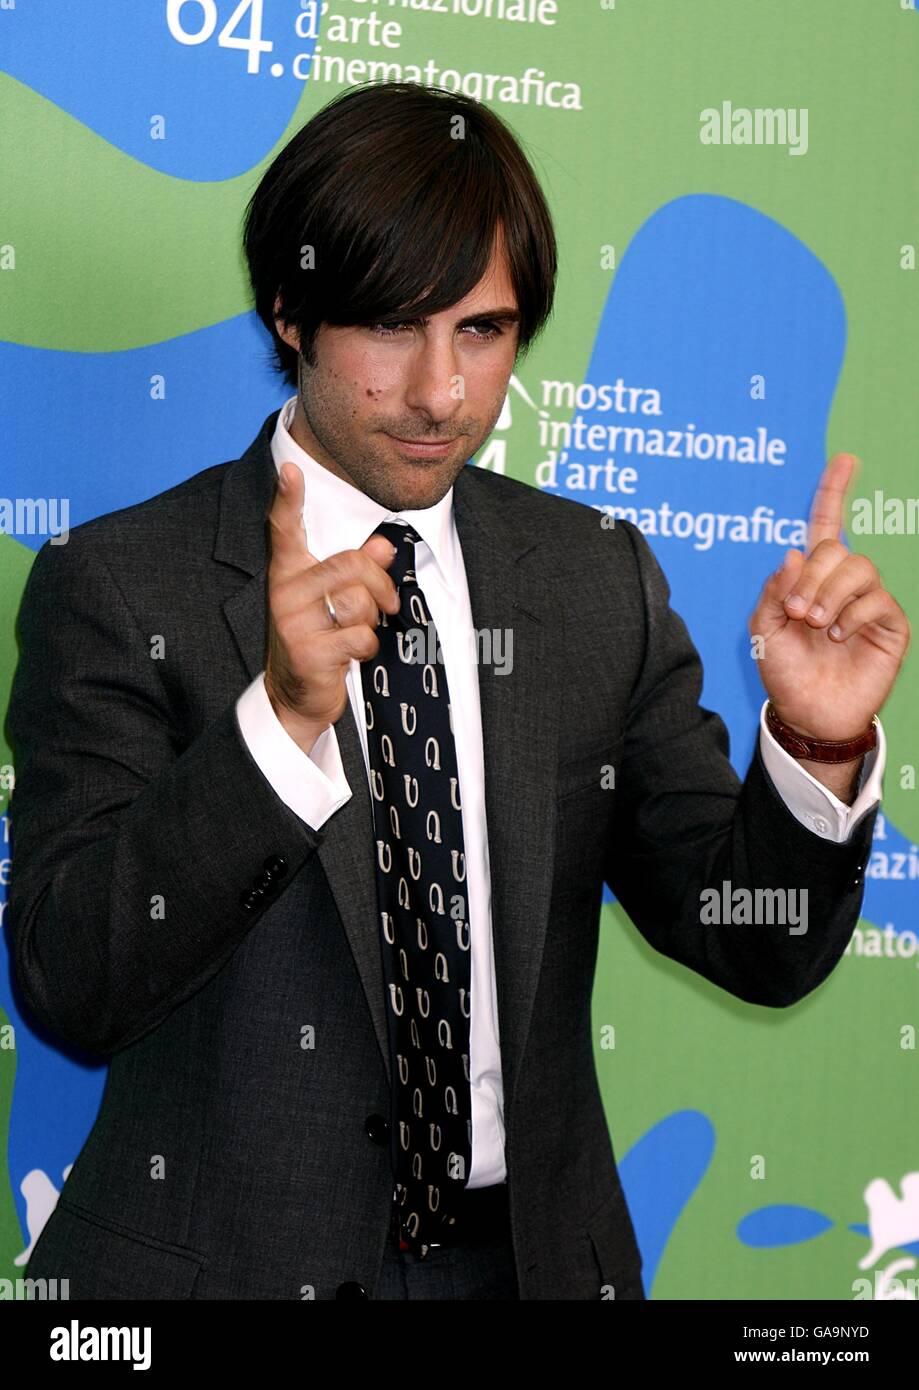 Jason Schwartzman during a photocall for the film 'The Darjeeling Limited', at the Venice Film Festival in Italy Stock Photo